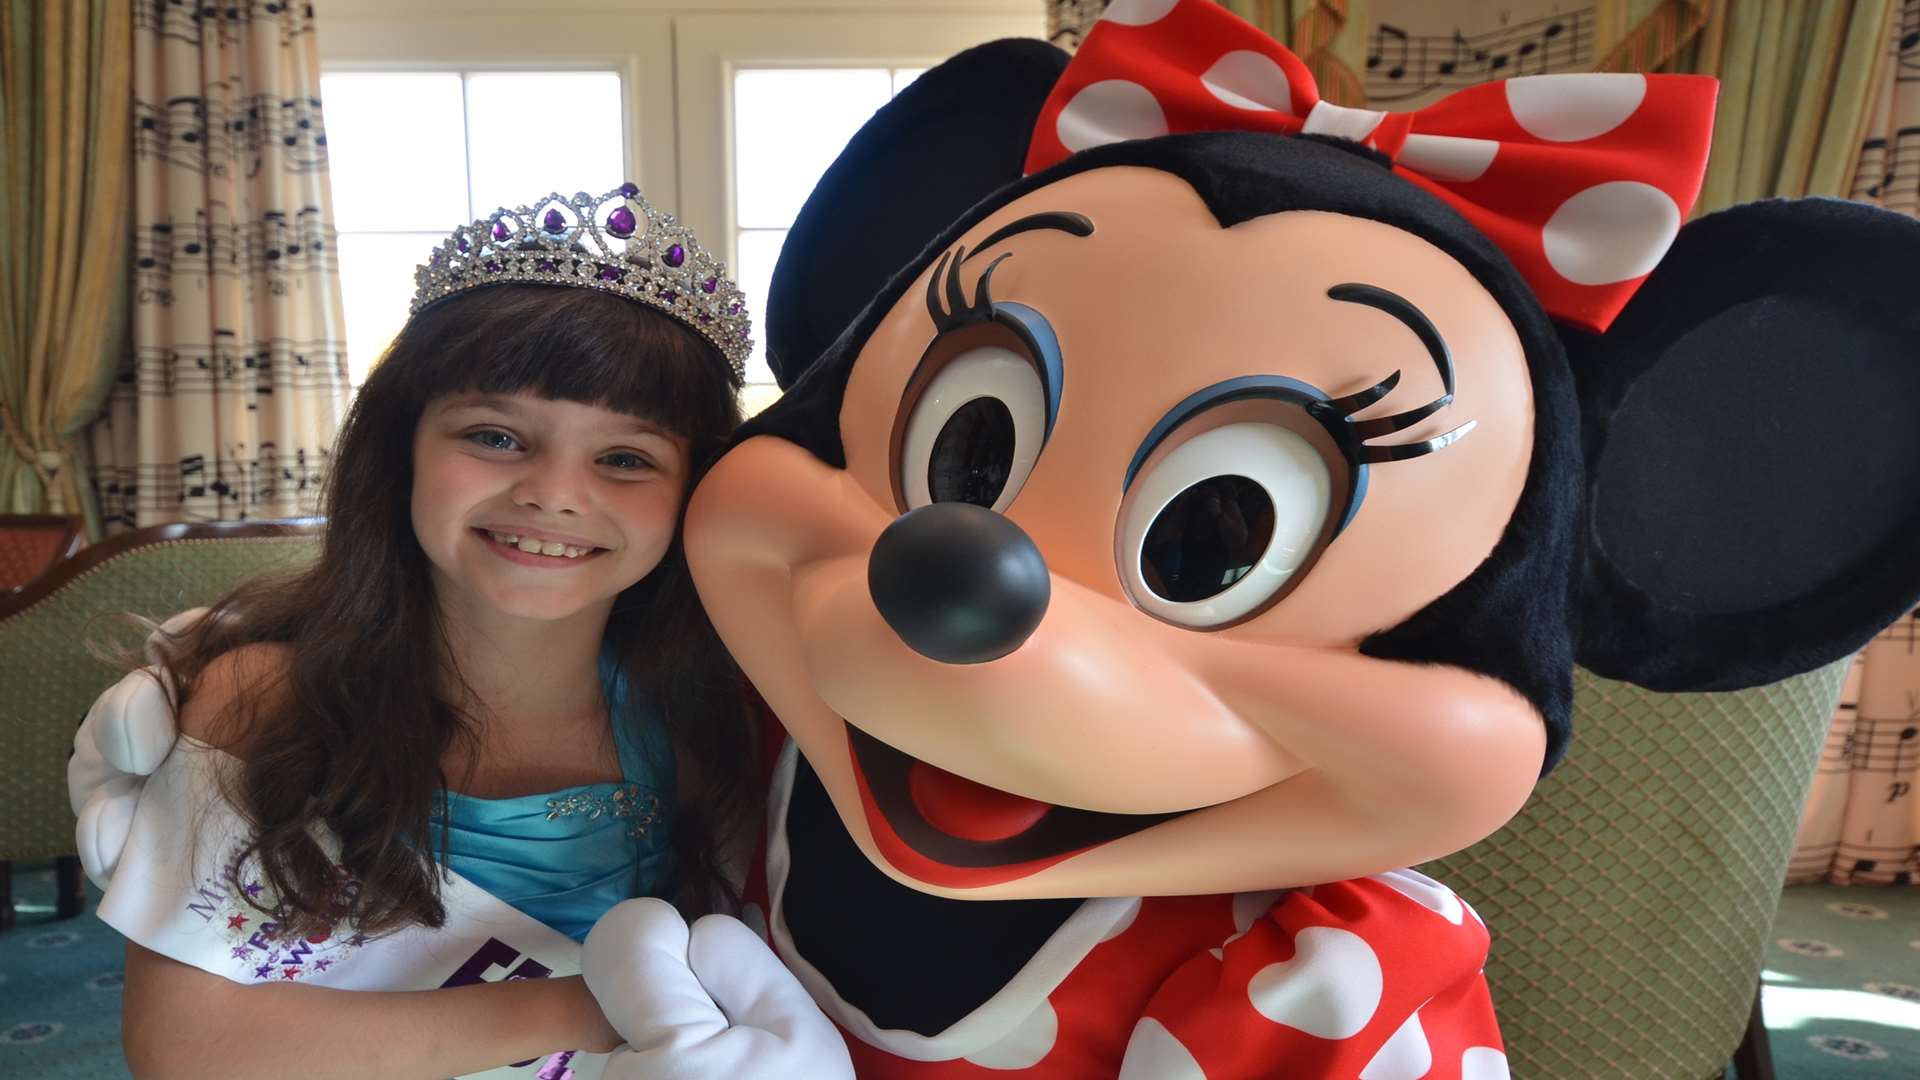 Amelia Woodward, eight, from Ashford, was awarded the title of Minnie Face of the UK